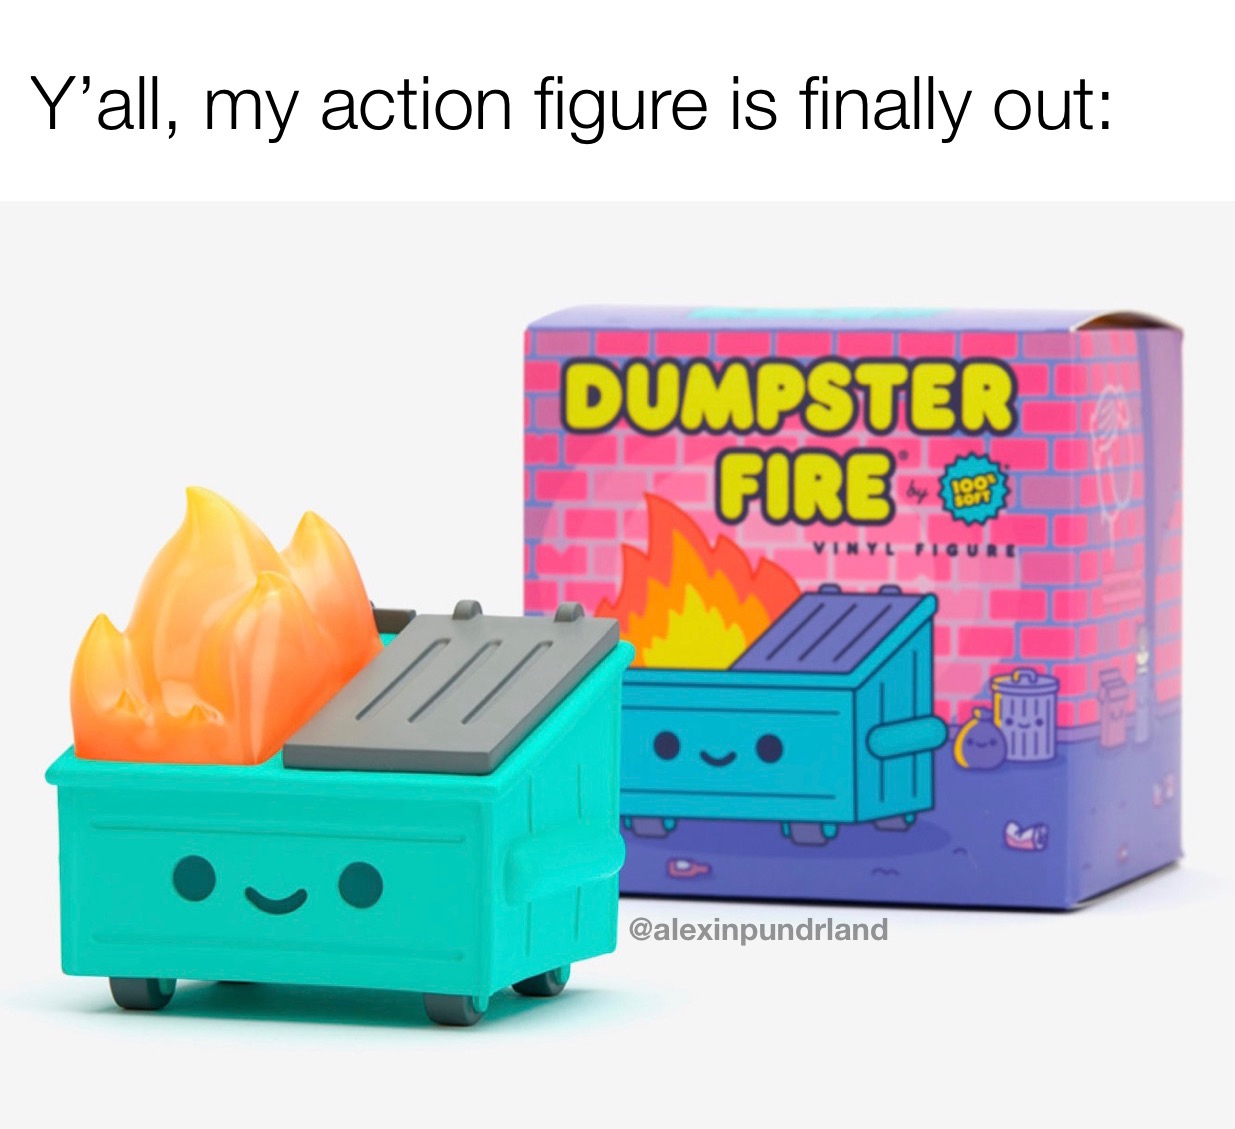 funny memes and random pics -  lil dumpster fire vinyl figure - Y'all, my action figure is finally out Dumpster Fire 100 Soft Vinyl